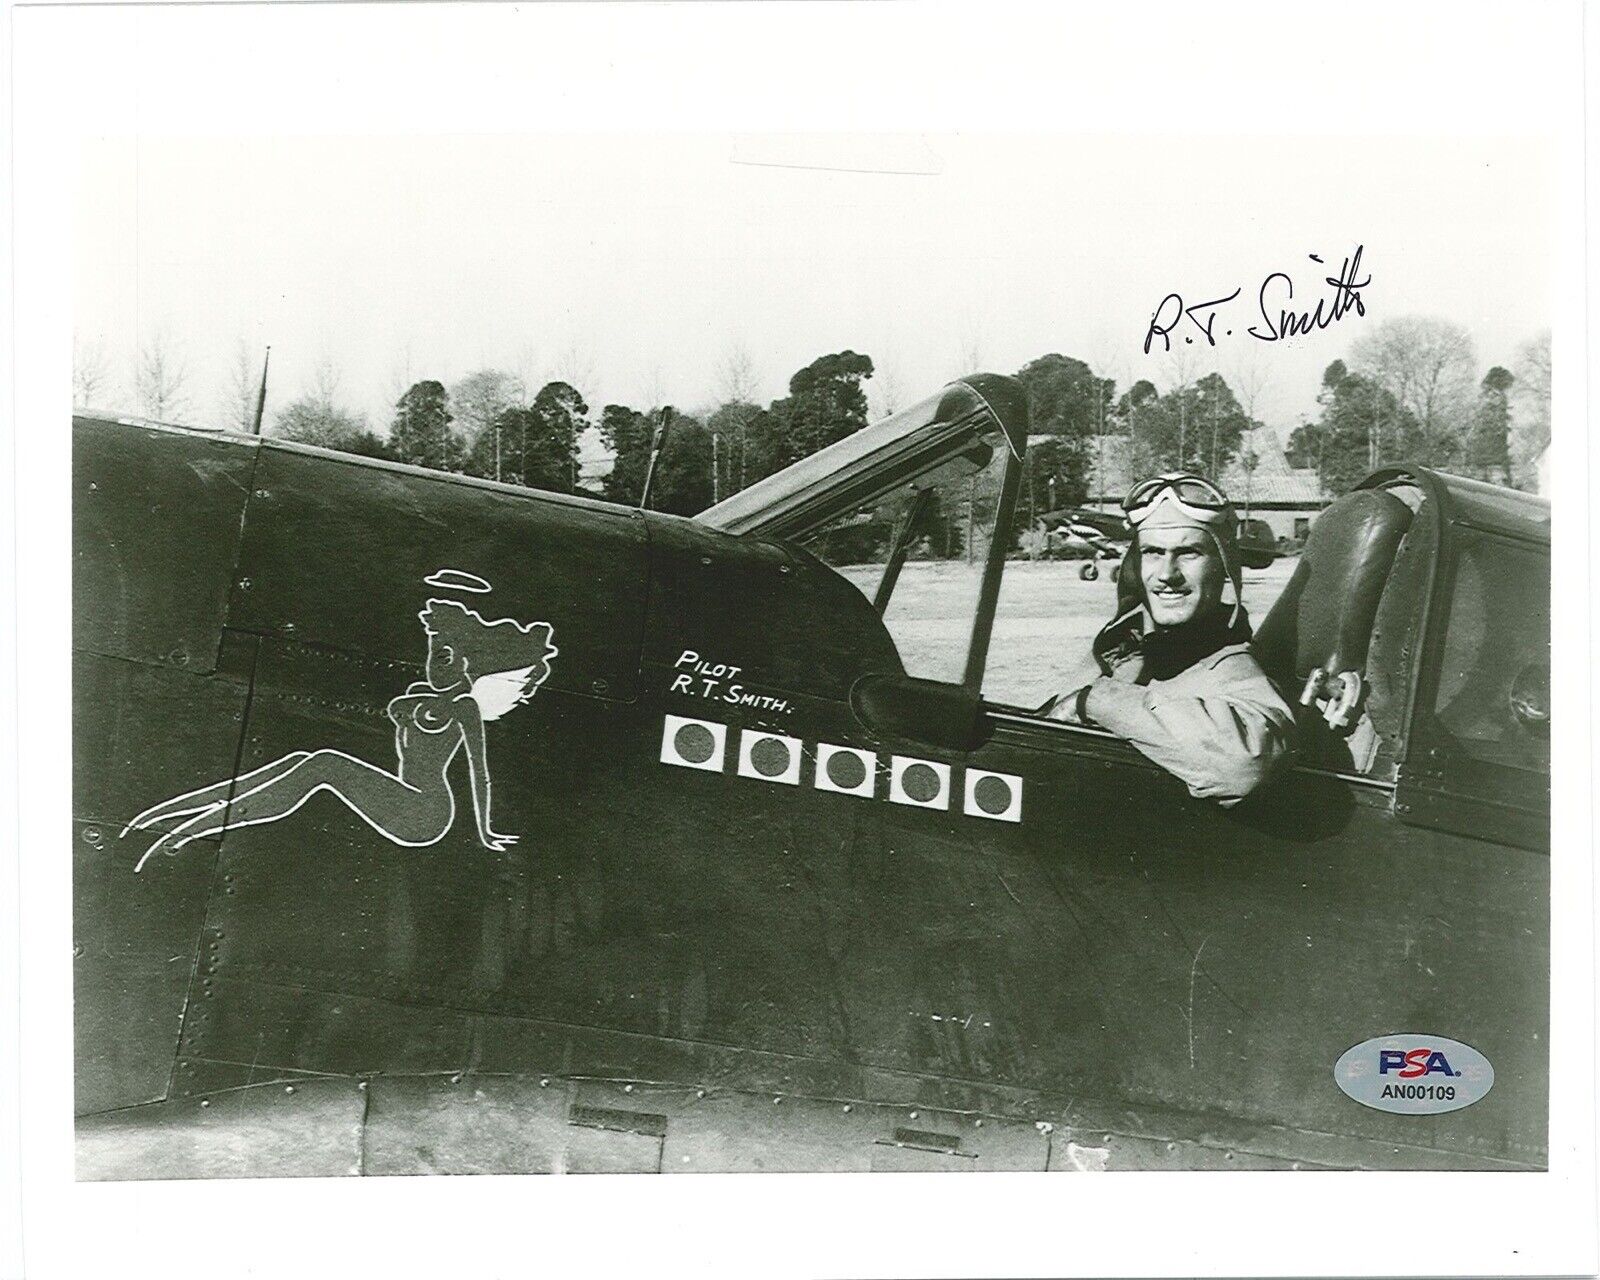 RT SMITH SIGNED 8X10 PHOTO PSA DNA AN00109 (D) WWII AVG FLYING TIGERS ACE